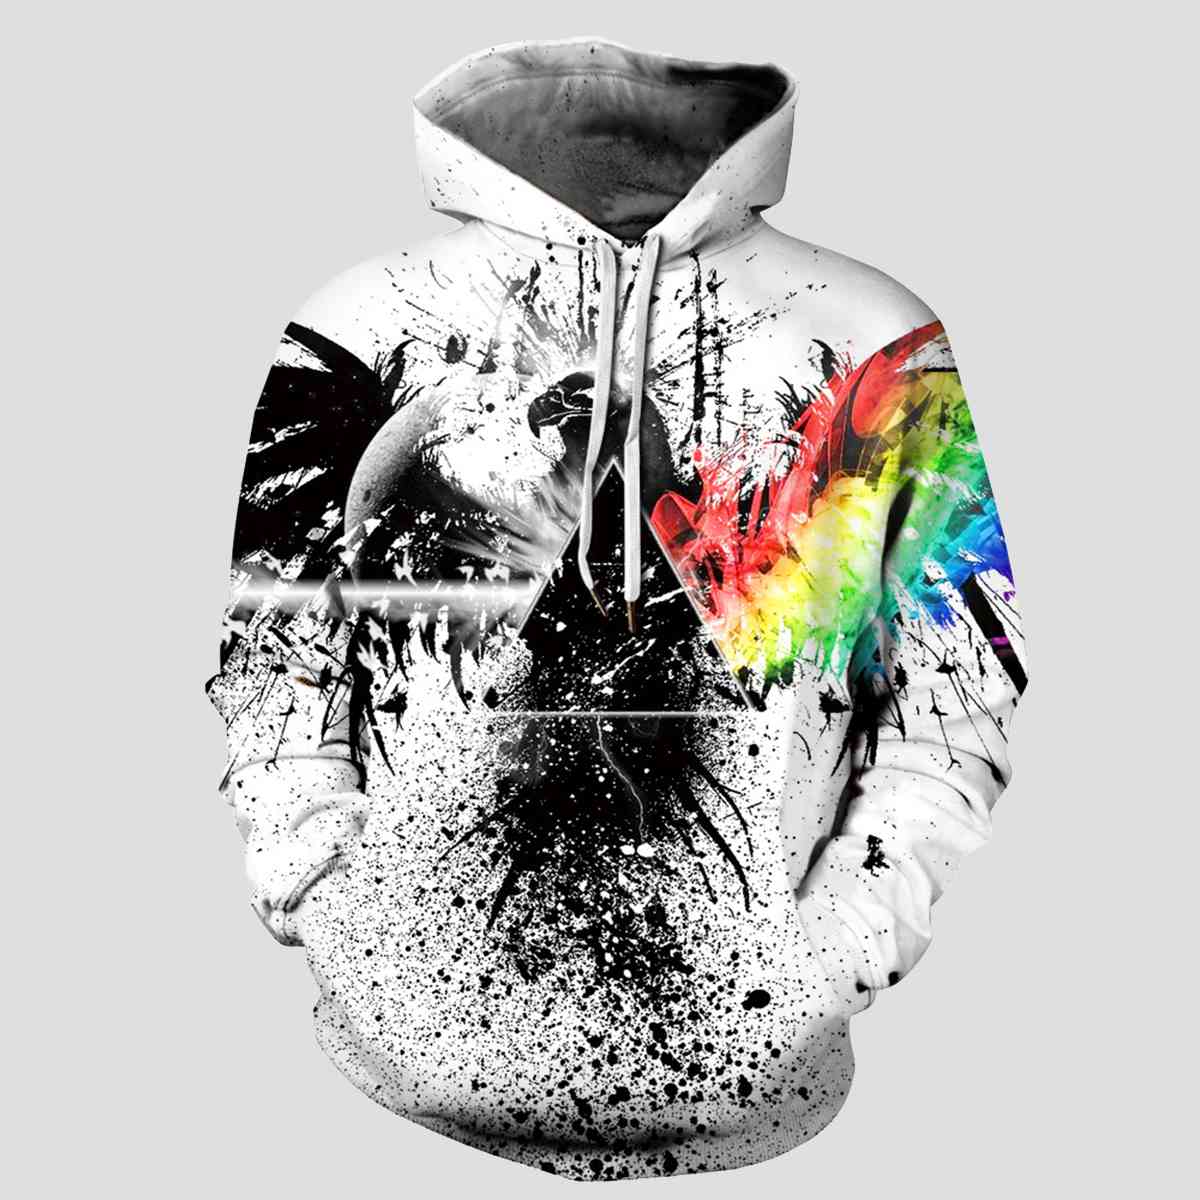 Full Size Printed Drawstring Hoodie with Pockets king-general-store-5710.myshopify.com